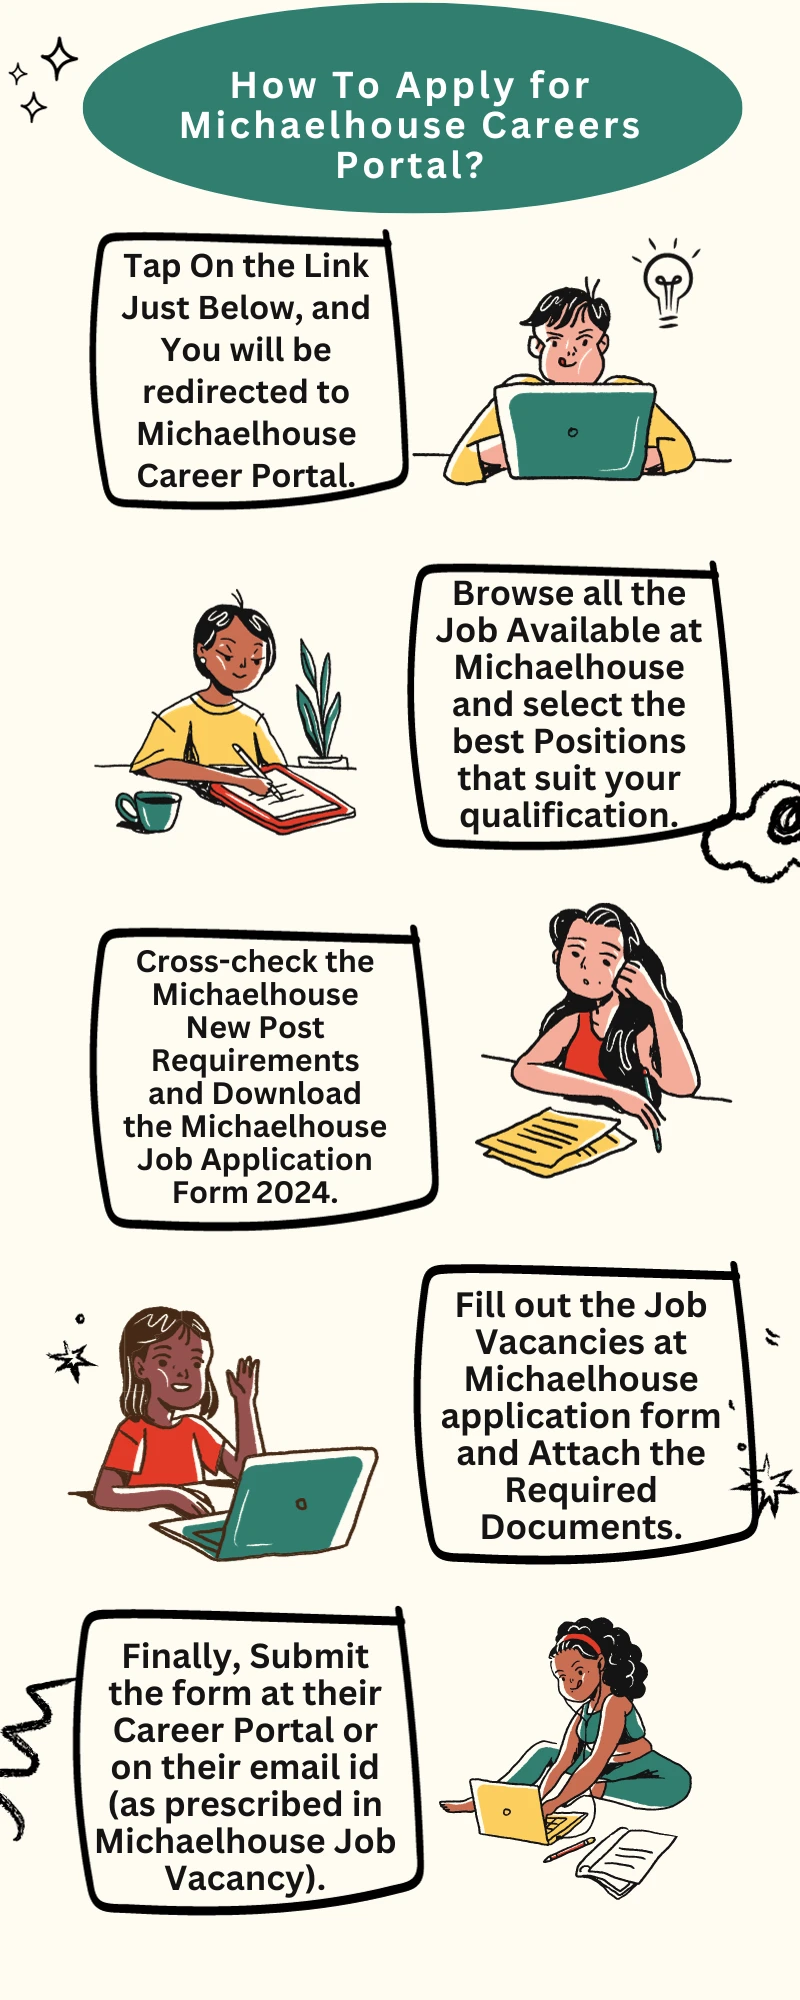 How To Apply for Michaelhouse Careers Portal?